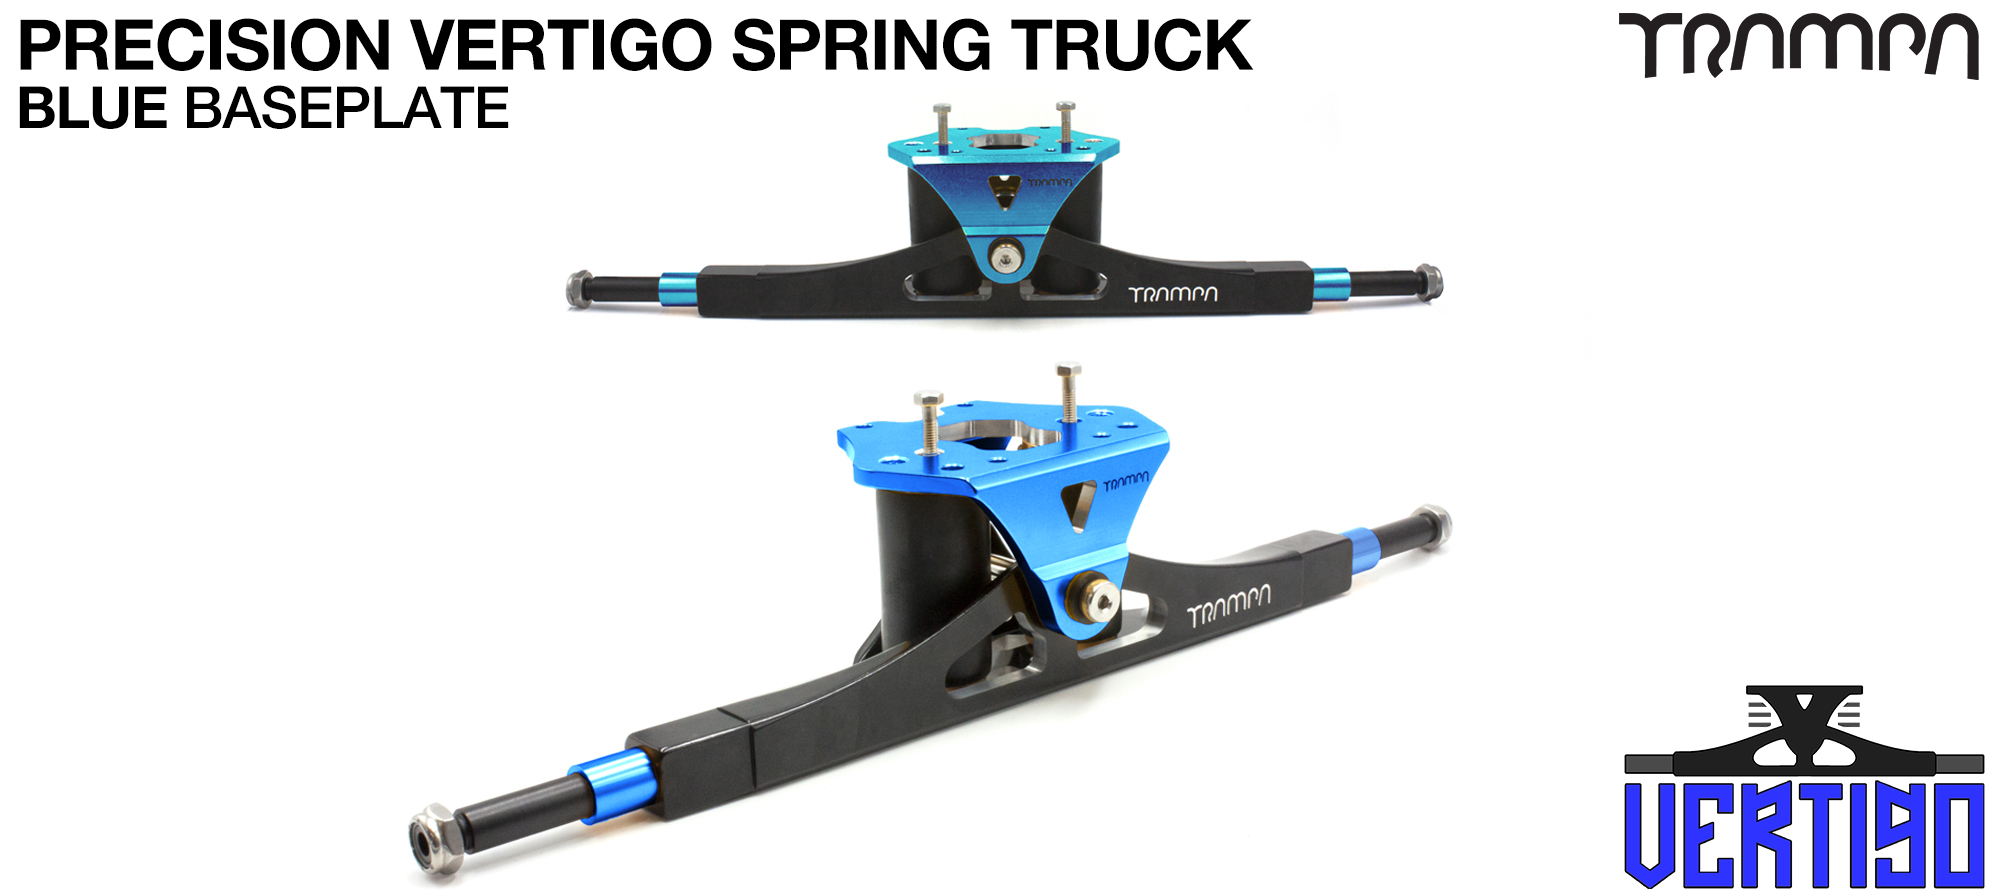 CNC Precision VERTIGO ATB Mountainboard TRUCK - 16.5 Inch Wide with 12mm Hollow Steel Axles Used when fixing Motor Mounts